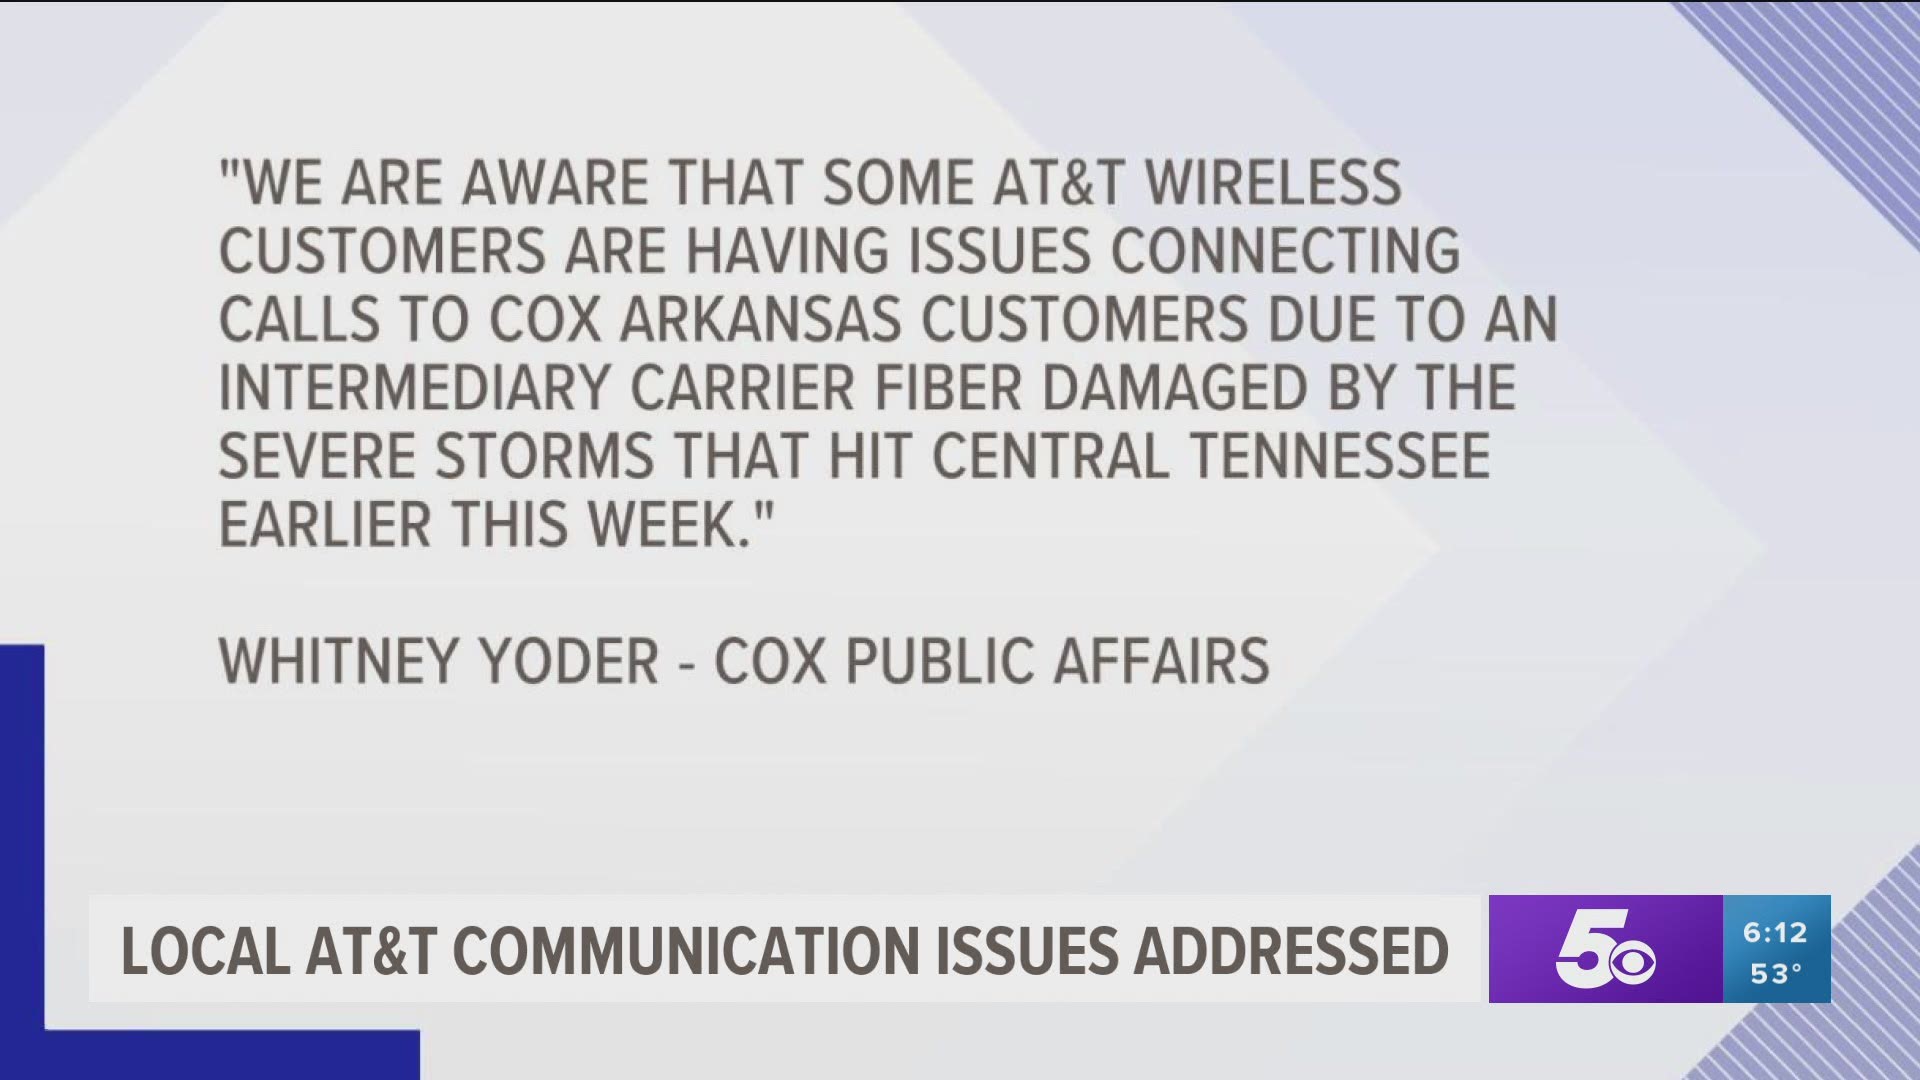 Local AT&T communication issues addressed